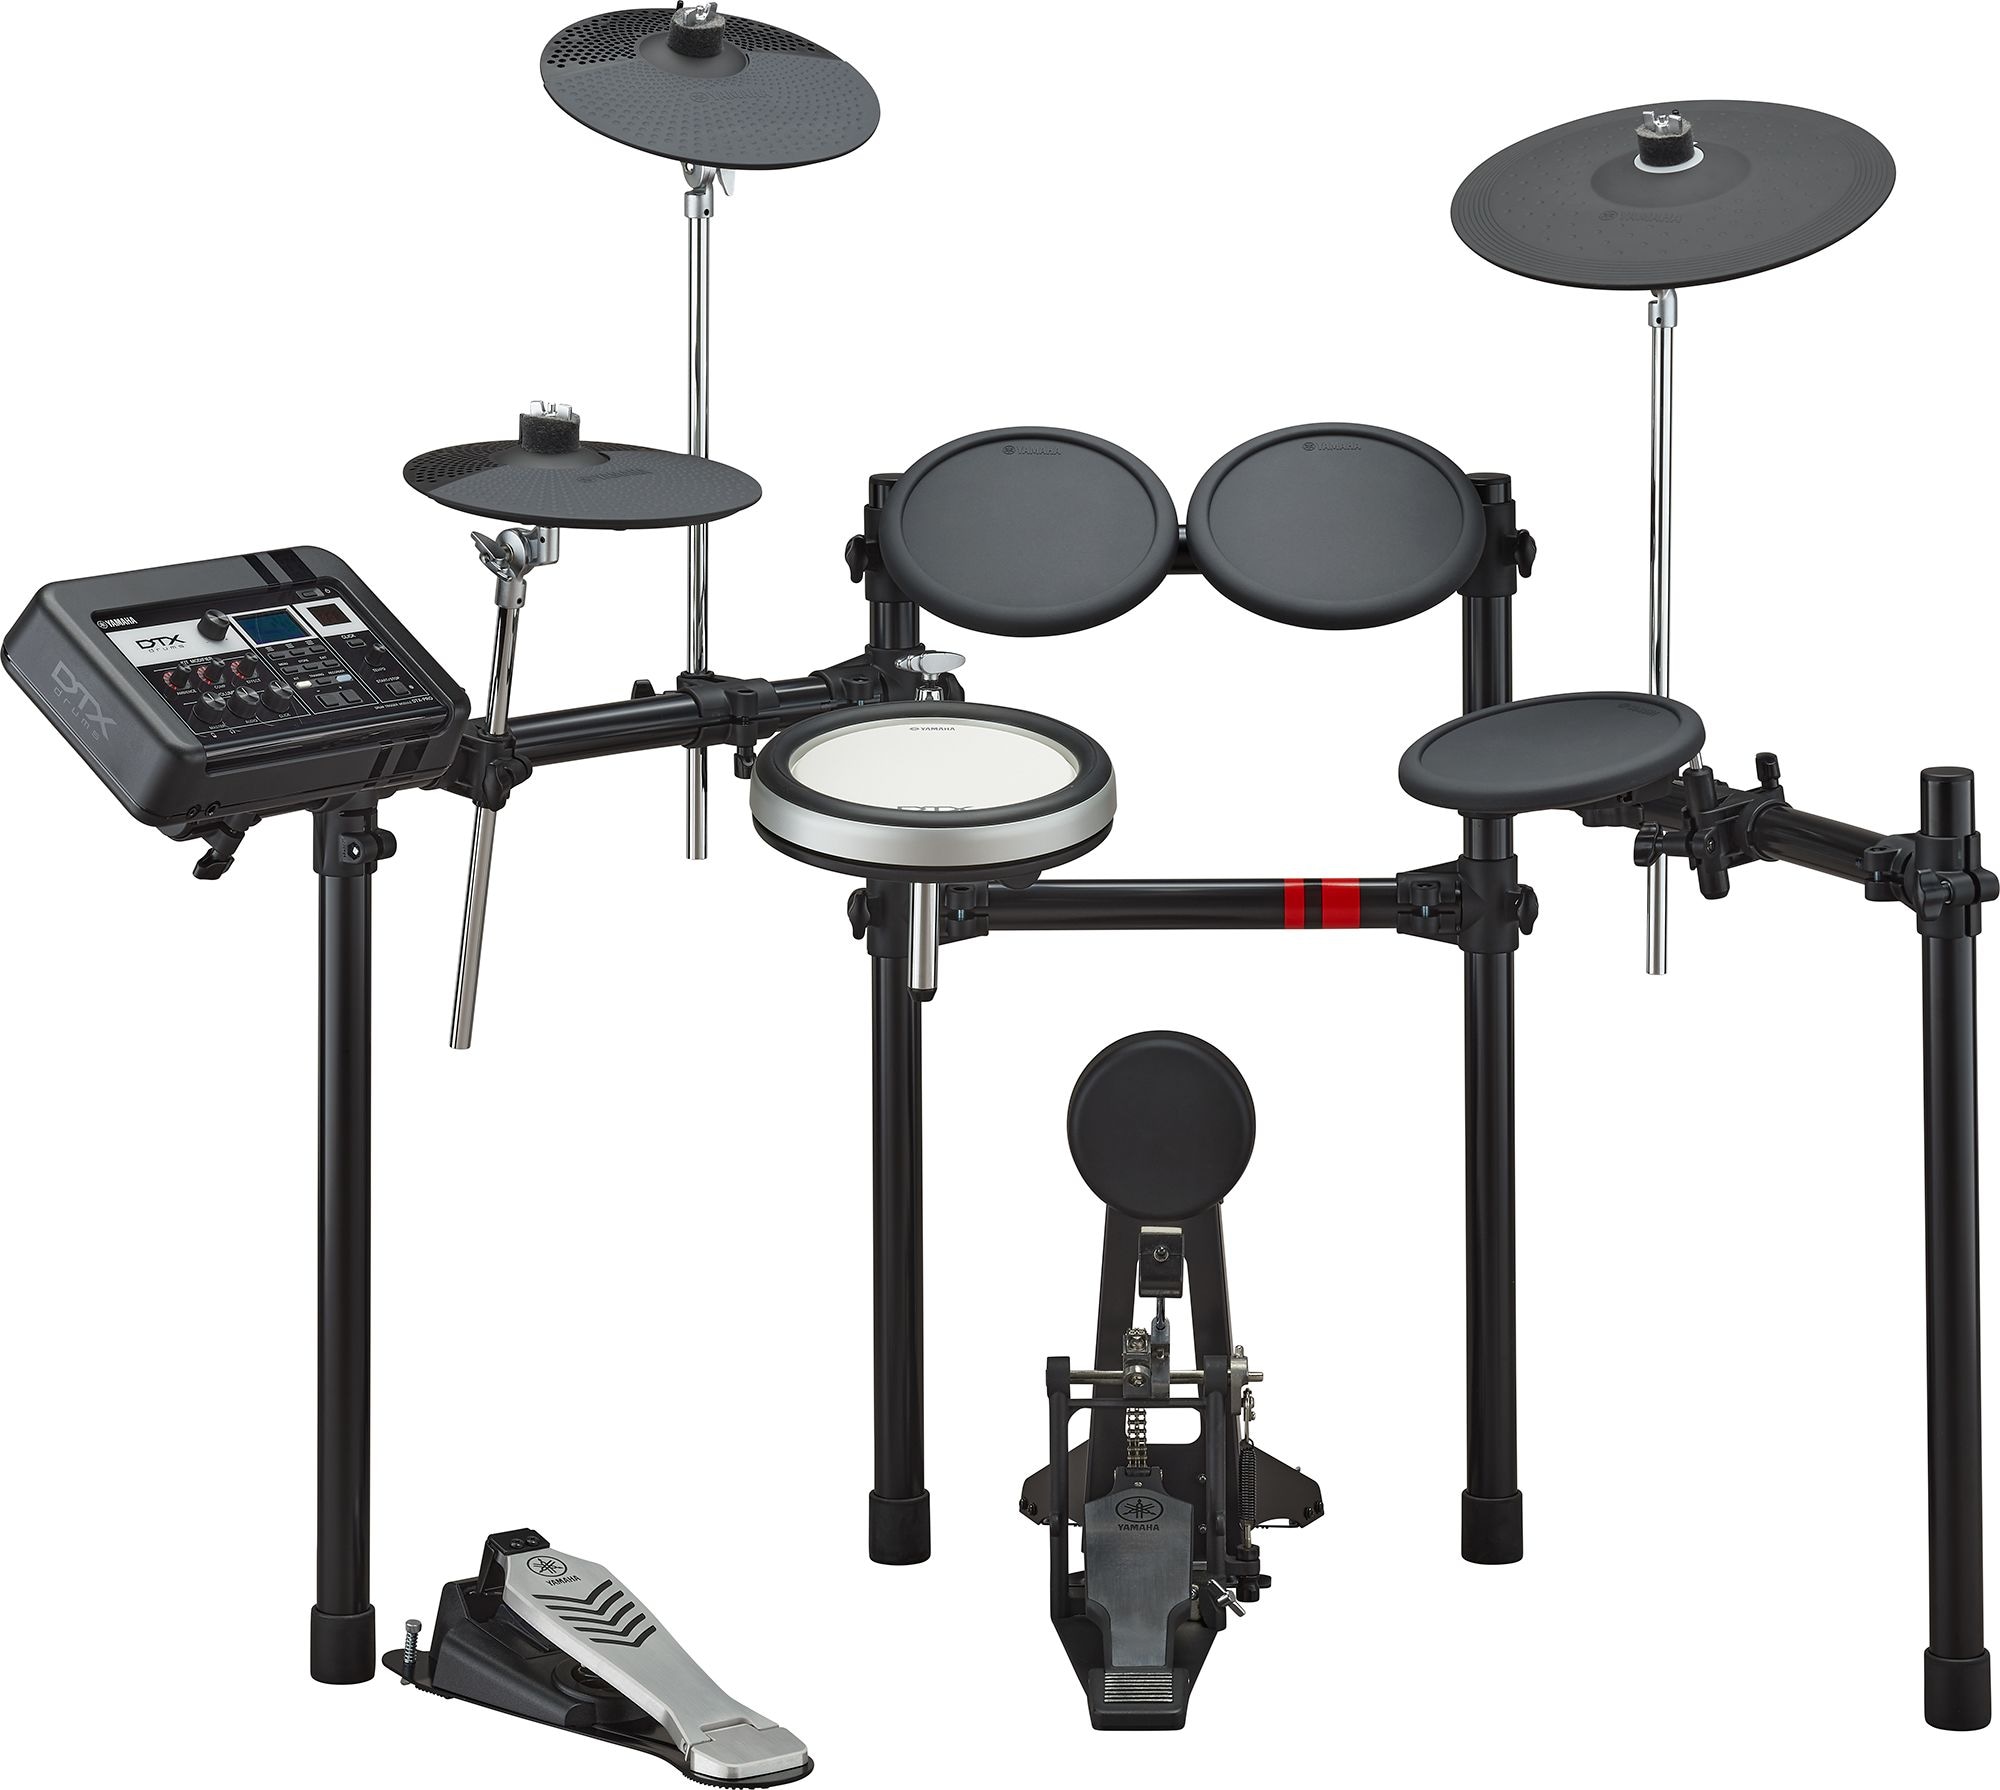 DTX6 Series - Products / Products - East Yamaha Electronic / - Middle - - Electronic - Africa - Drum Asia / Latin / CIS Musical / America - Drums Drums Kits Oceania Instruments